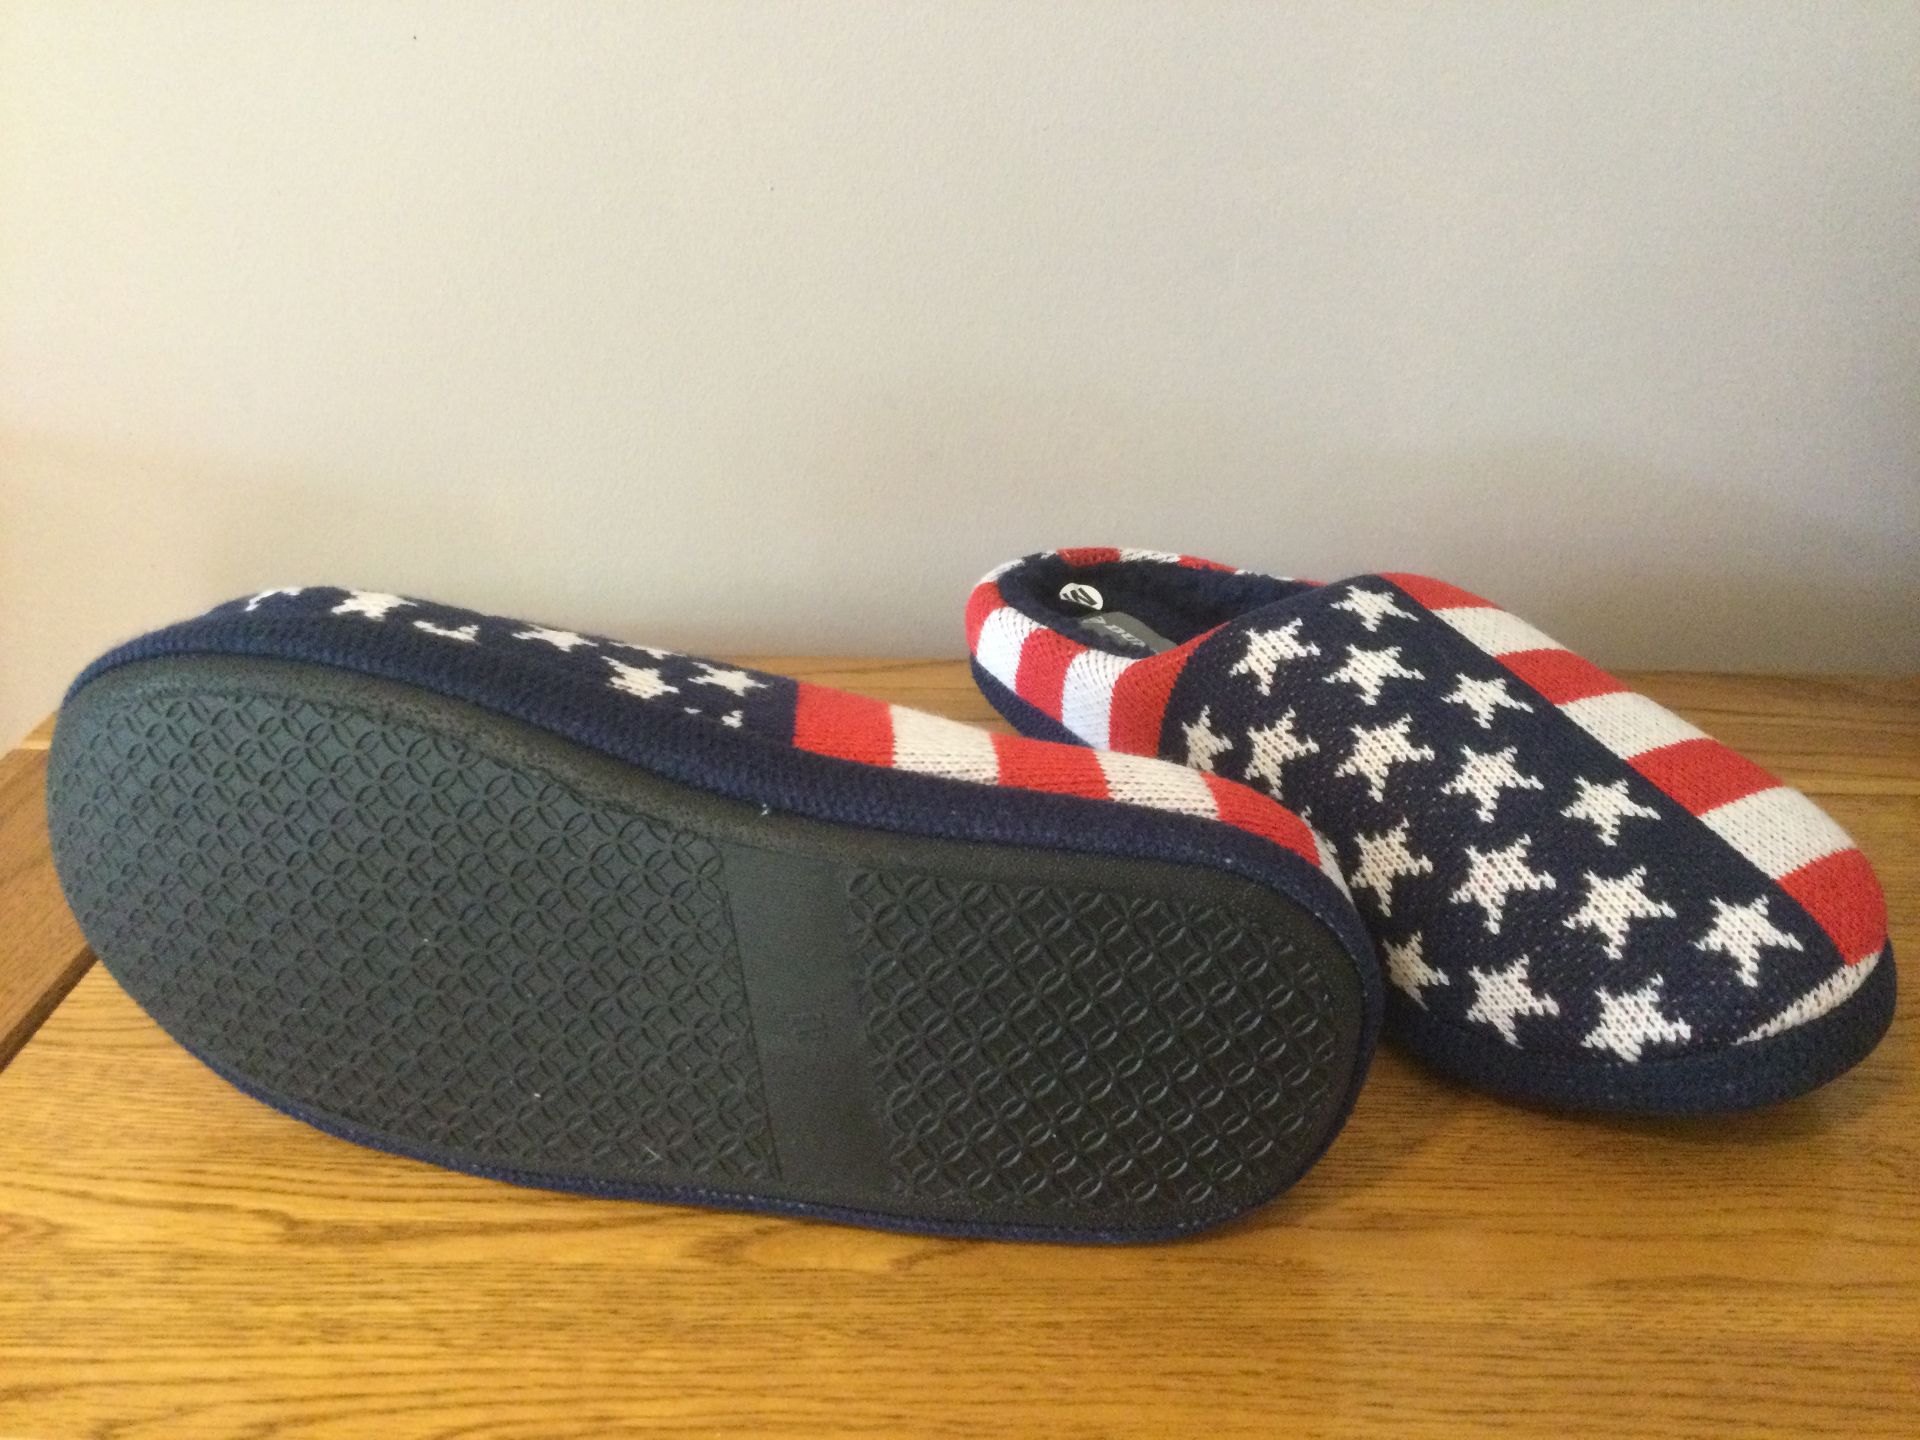 Job Lot 10 x Pairs Men's Dunlop, “USA Stars and Stripes” Memory Foam, Mule Slippers, Size M (8/9) - Image 5 of 7